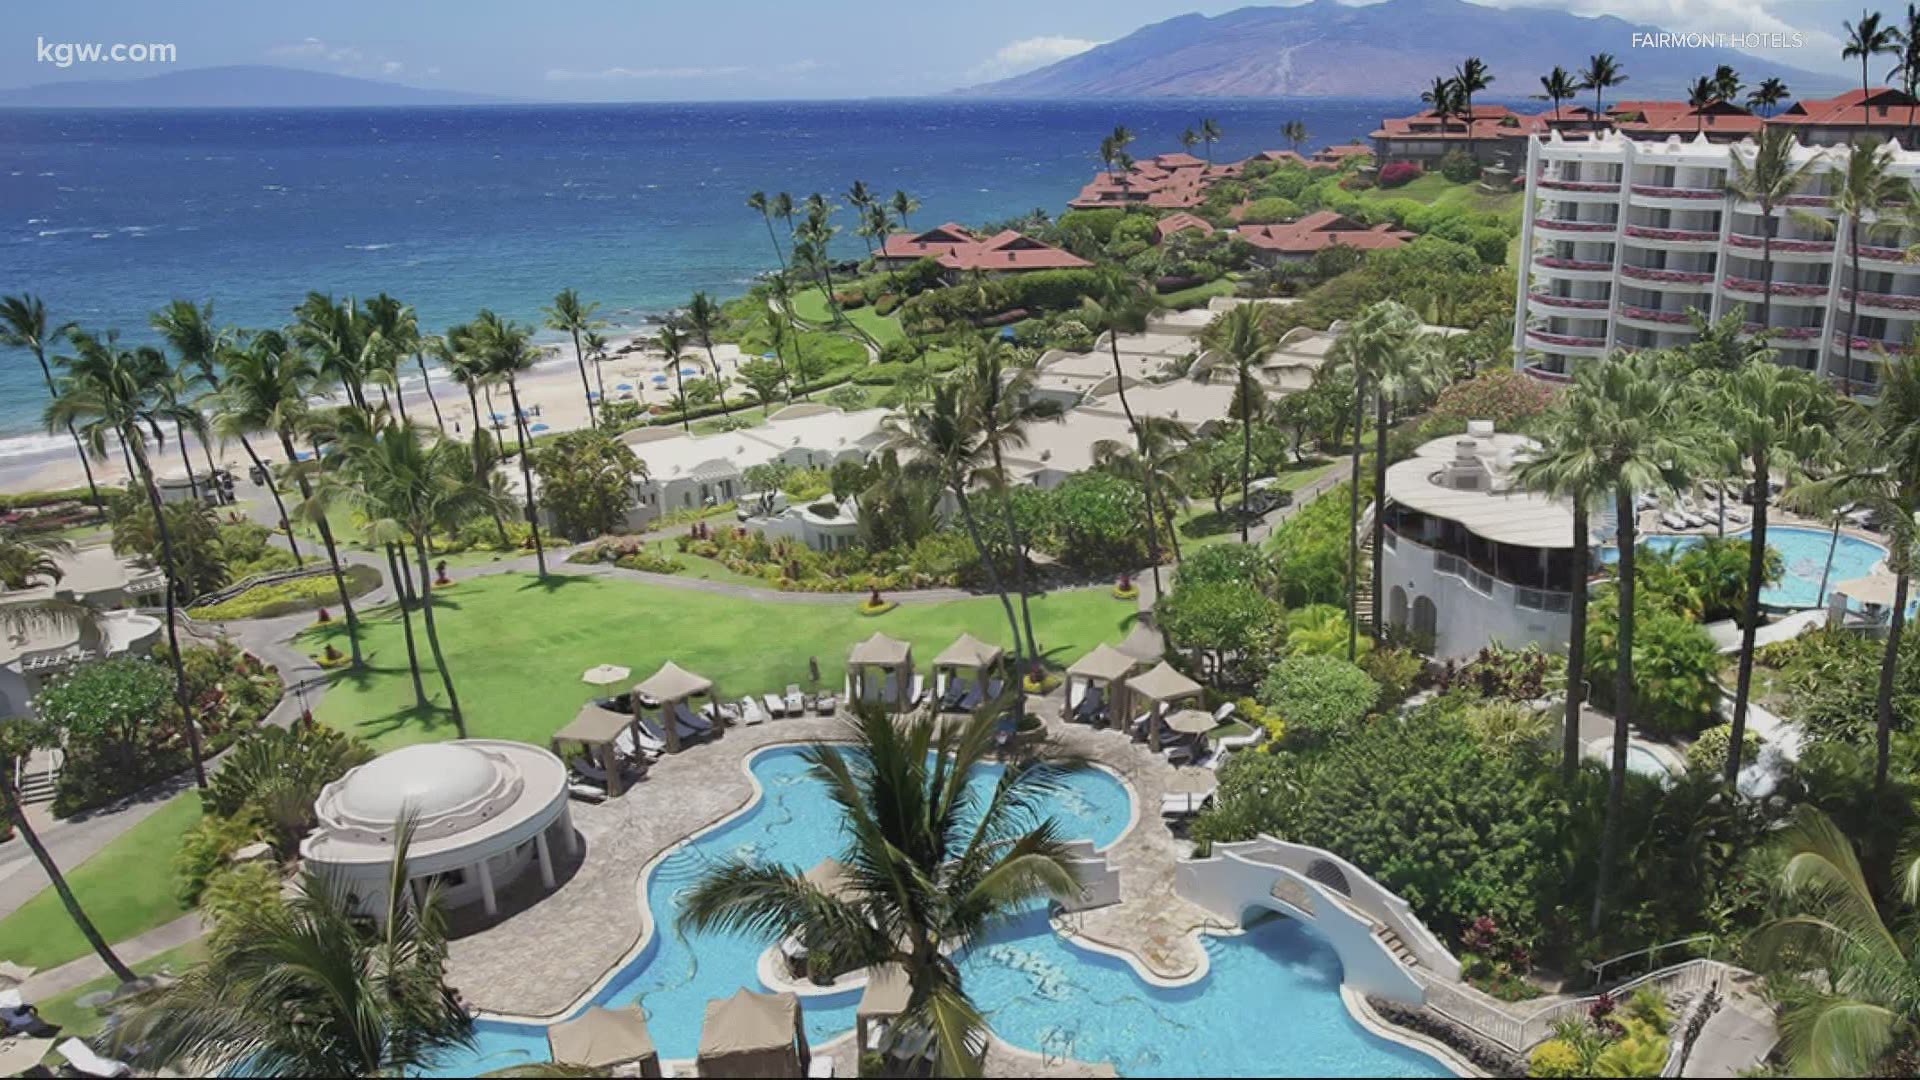 Lawmakers and lobbyists from around the country traveled to Maui last week for an annual conference.